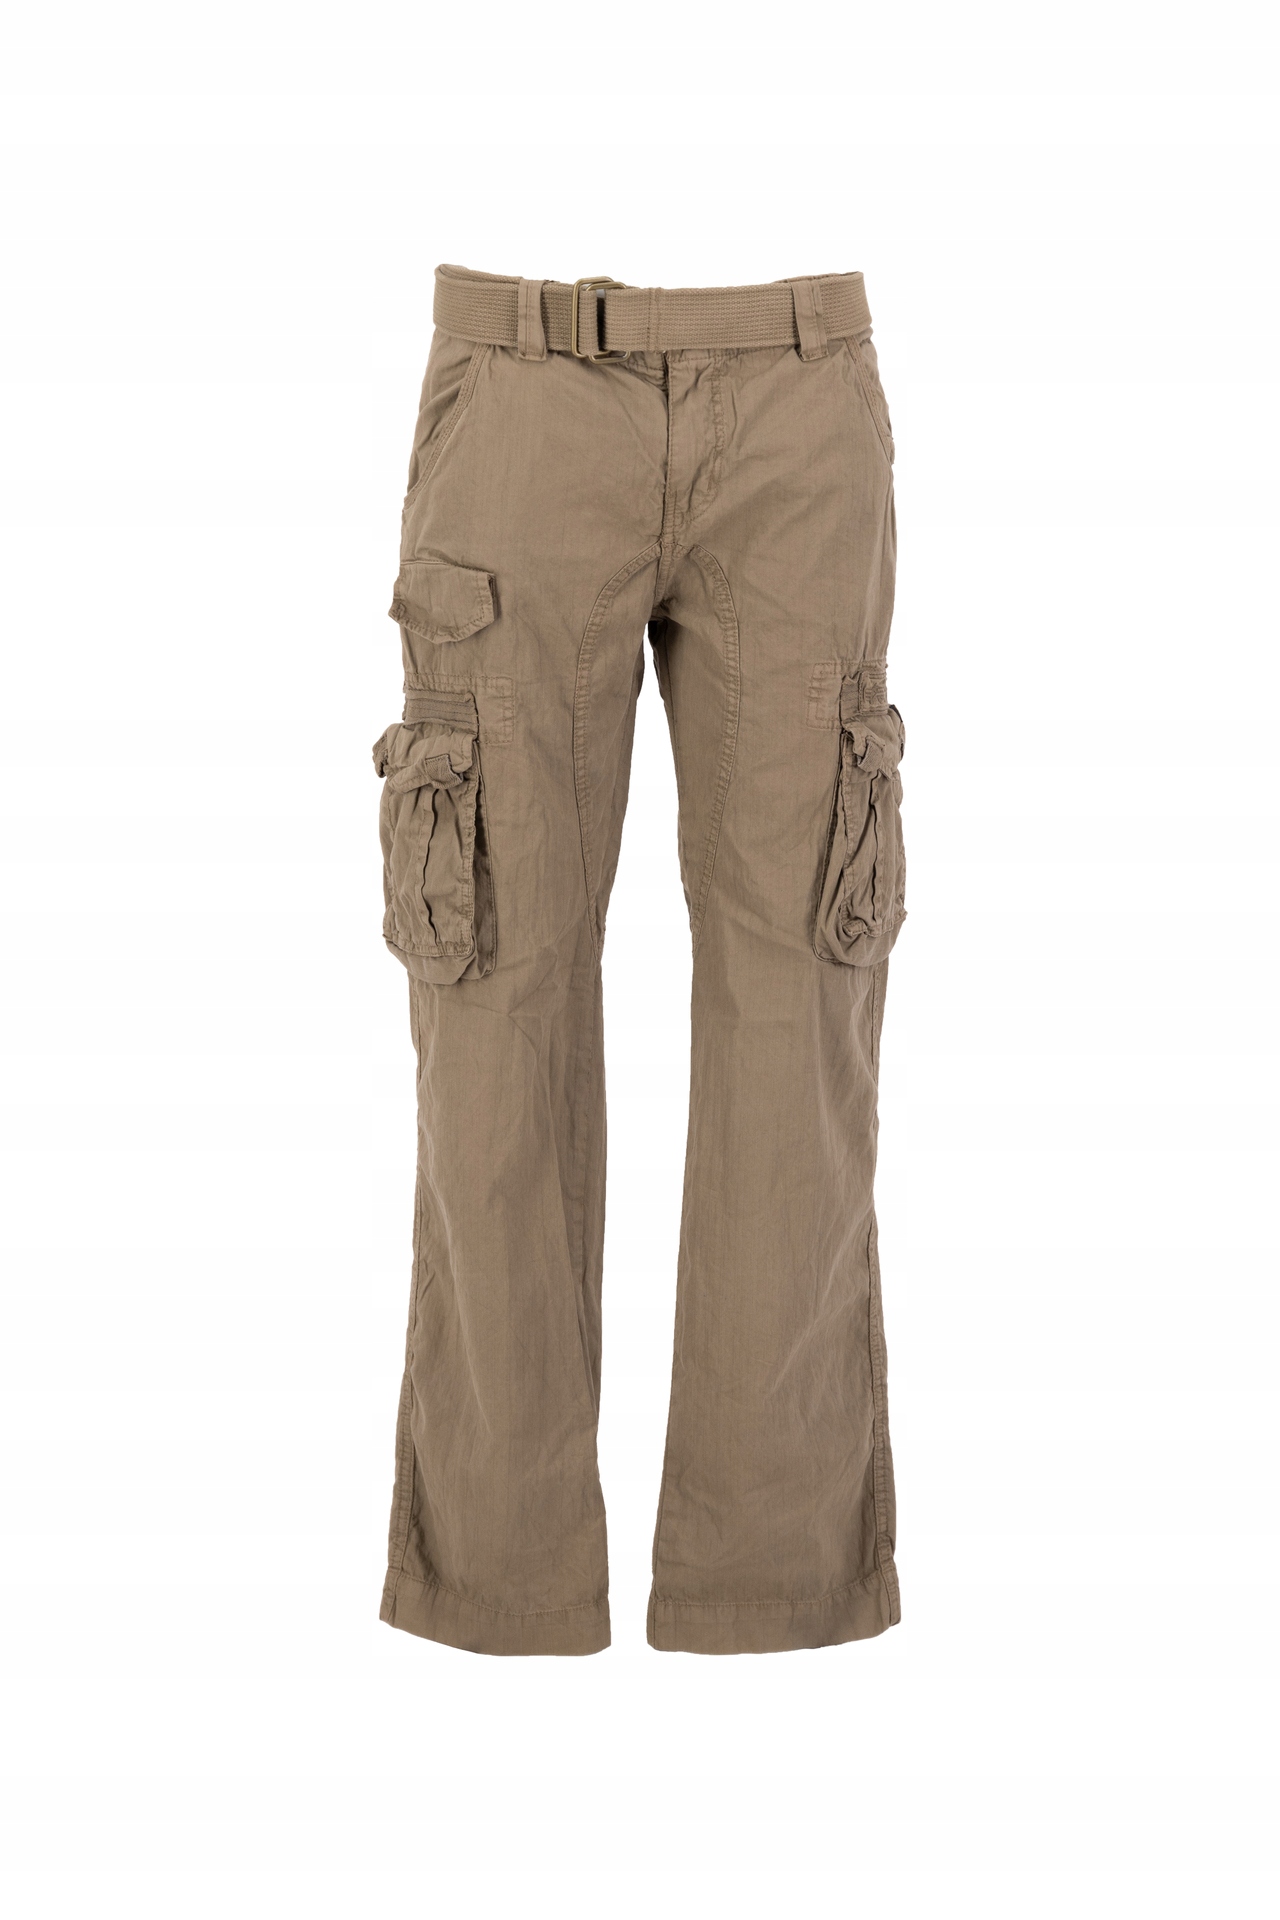 Nohavice Alpha Industries Devision pant taupe 30